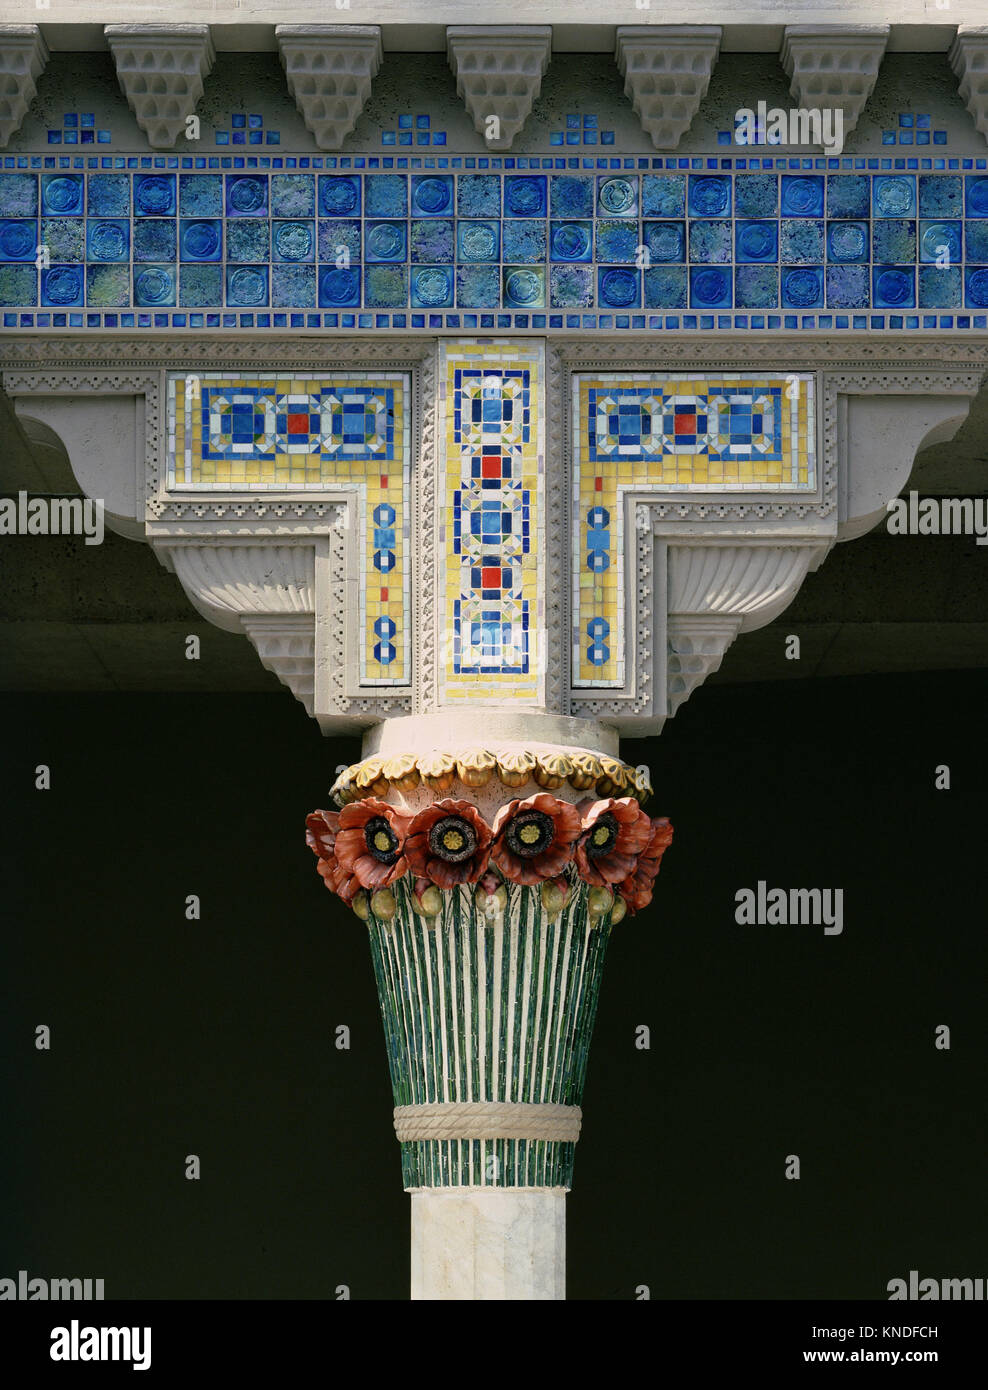 Architectural Elements from Laurelton Hall, Oyster Bay, New York MET  1978.10.1detail 133 Designer: Designed by Louis Comfort Tiffany, American,  New York 1848?1933 New York, Architectural Elements from Laurelton Hall,  Oyster Bay, New